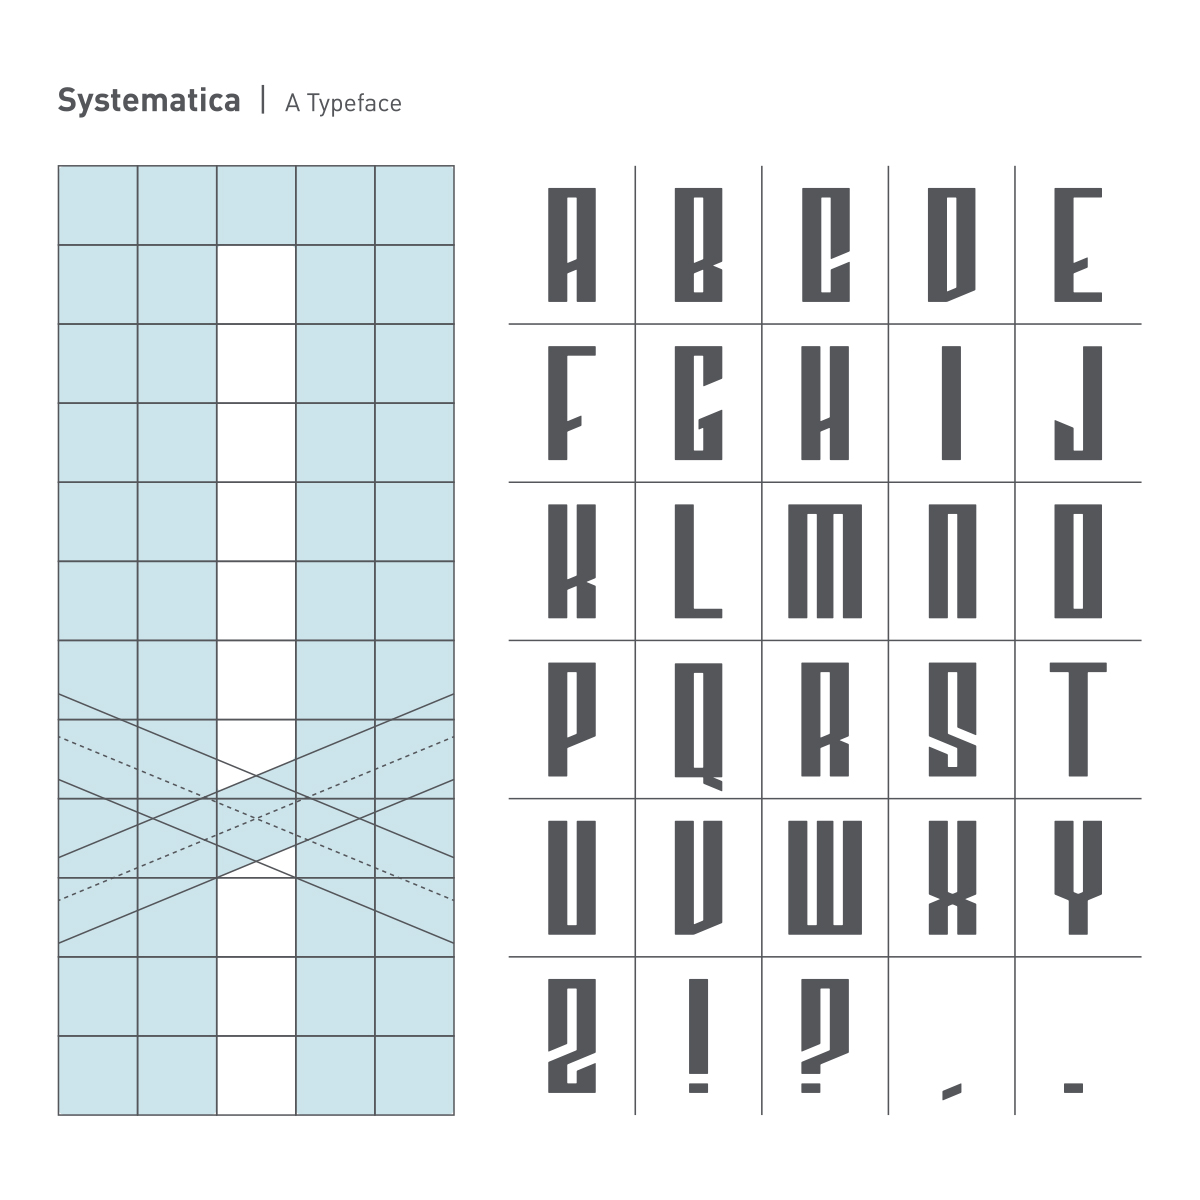 featured image two:Systematica | A Typeface